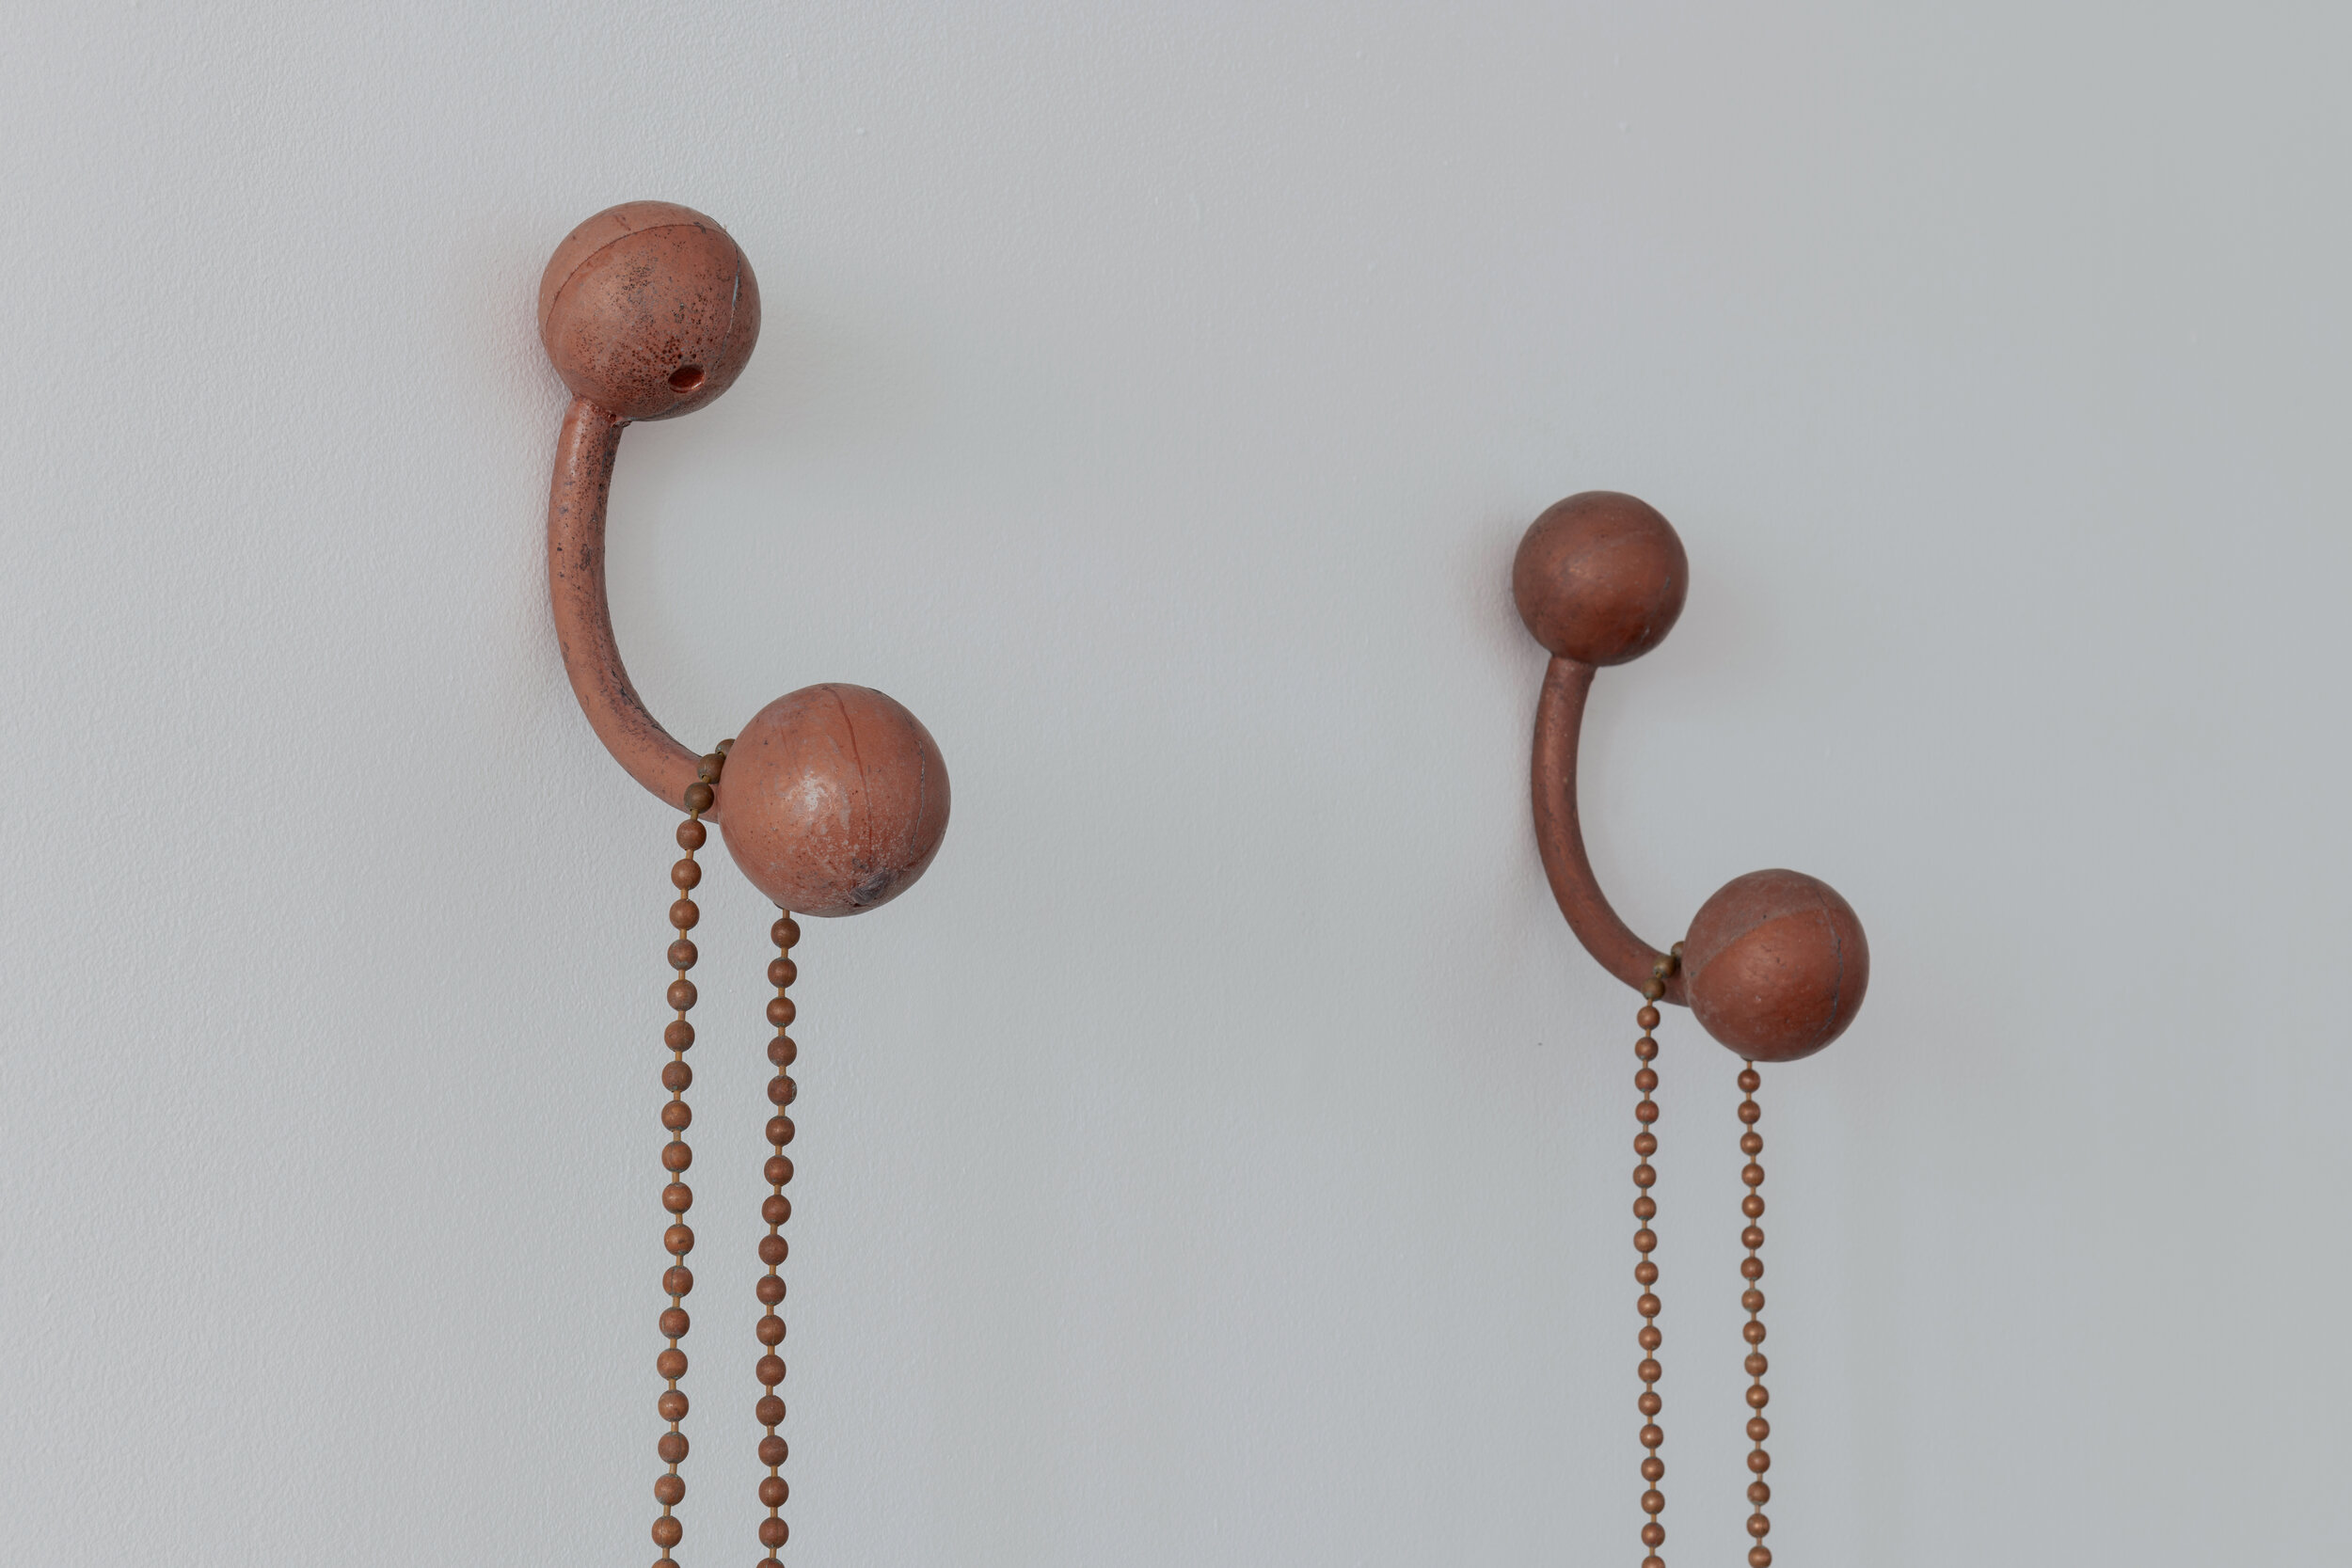  Detail view of:   Sessa Englund   Twin piercings with chain and butterflies (piercing series)  2021 Mahogany wood, cooper chain necklace, rust, mineral copper dust, cast resin 